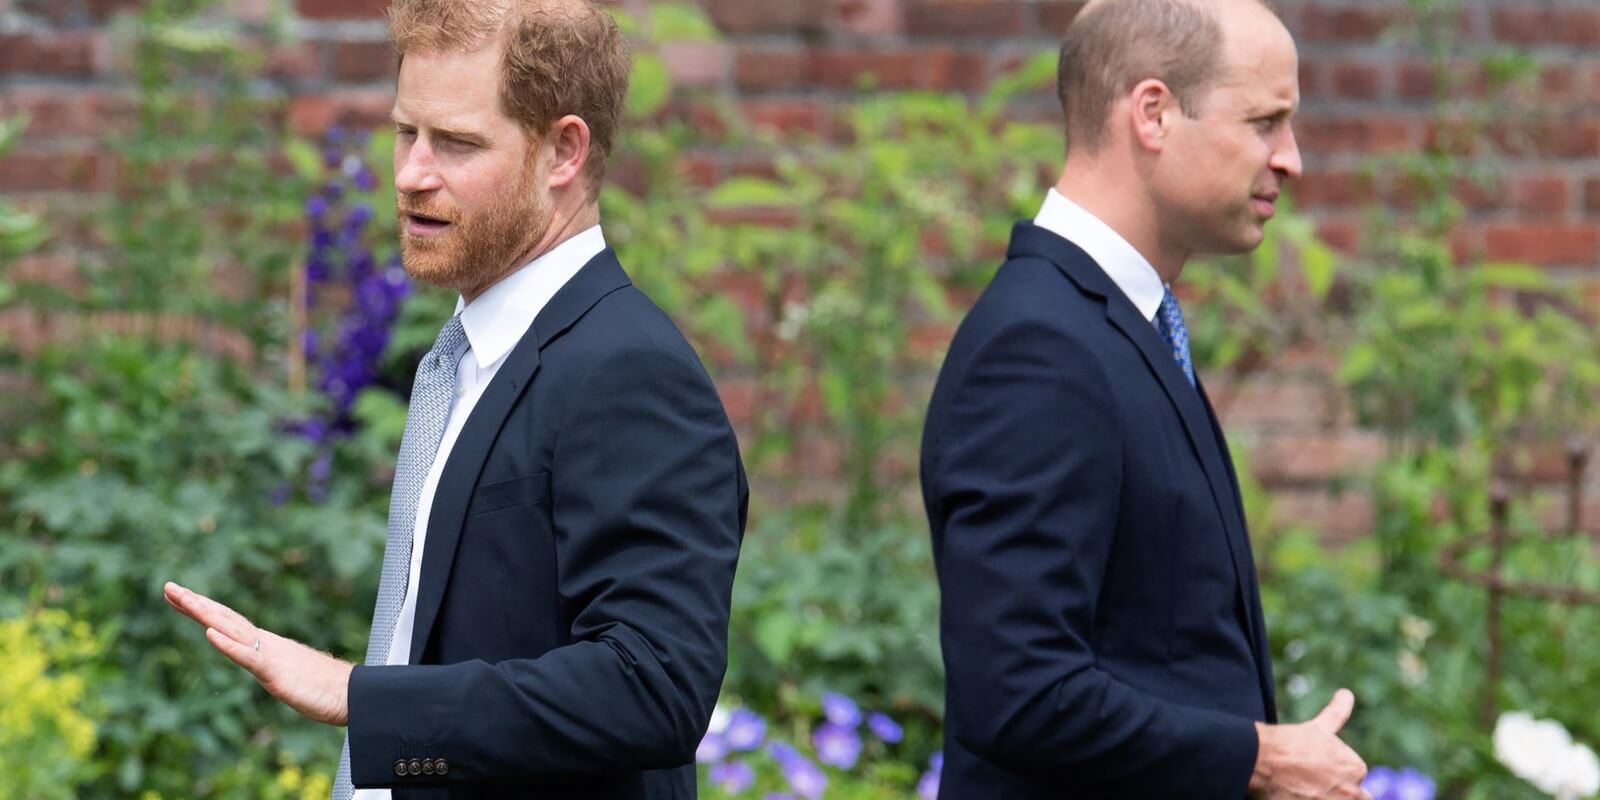 Prince Harry and Prince William attend the unveiling of a statue of their mother, Princess Diana at The Sunken Garden in Kensington Palace, London on July 1, 2021, which would have been her 60th birthday.